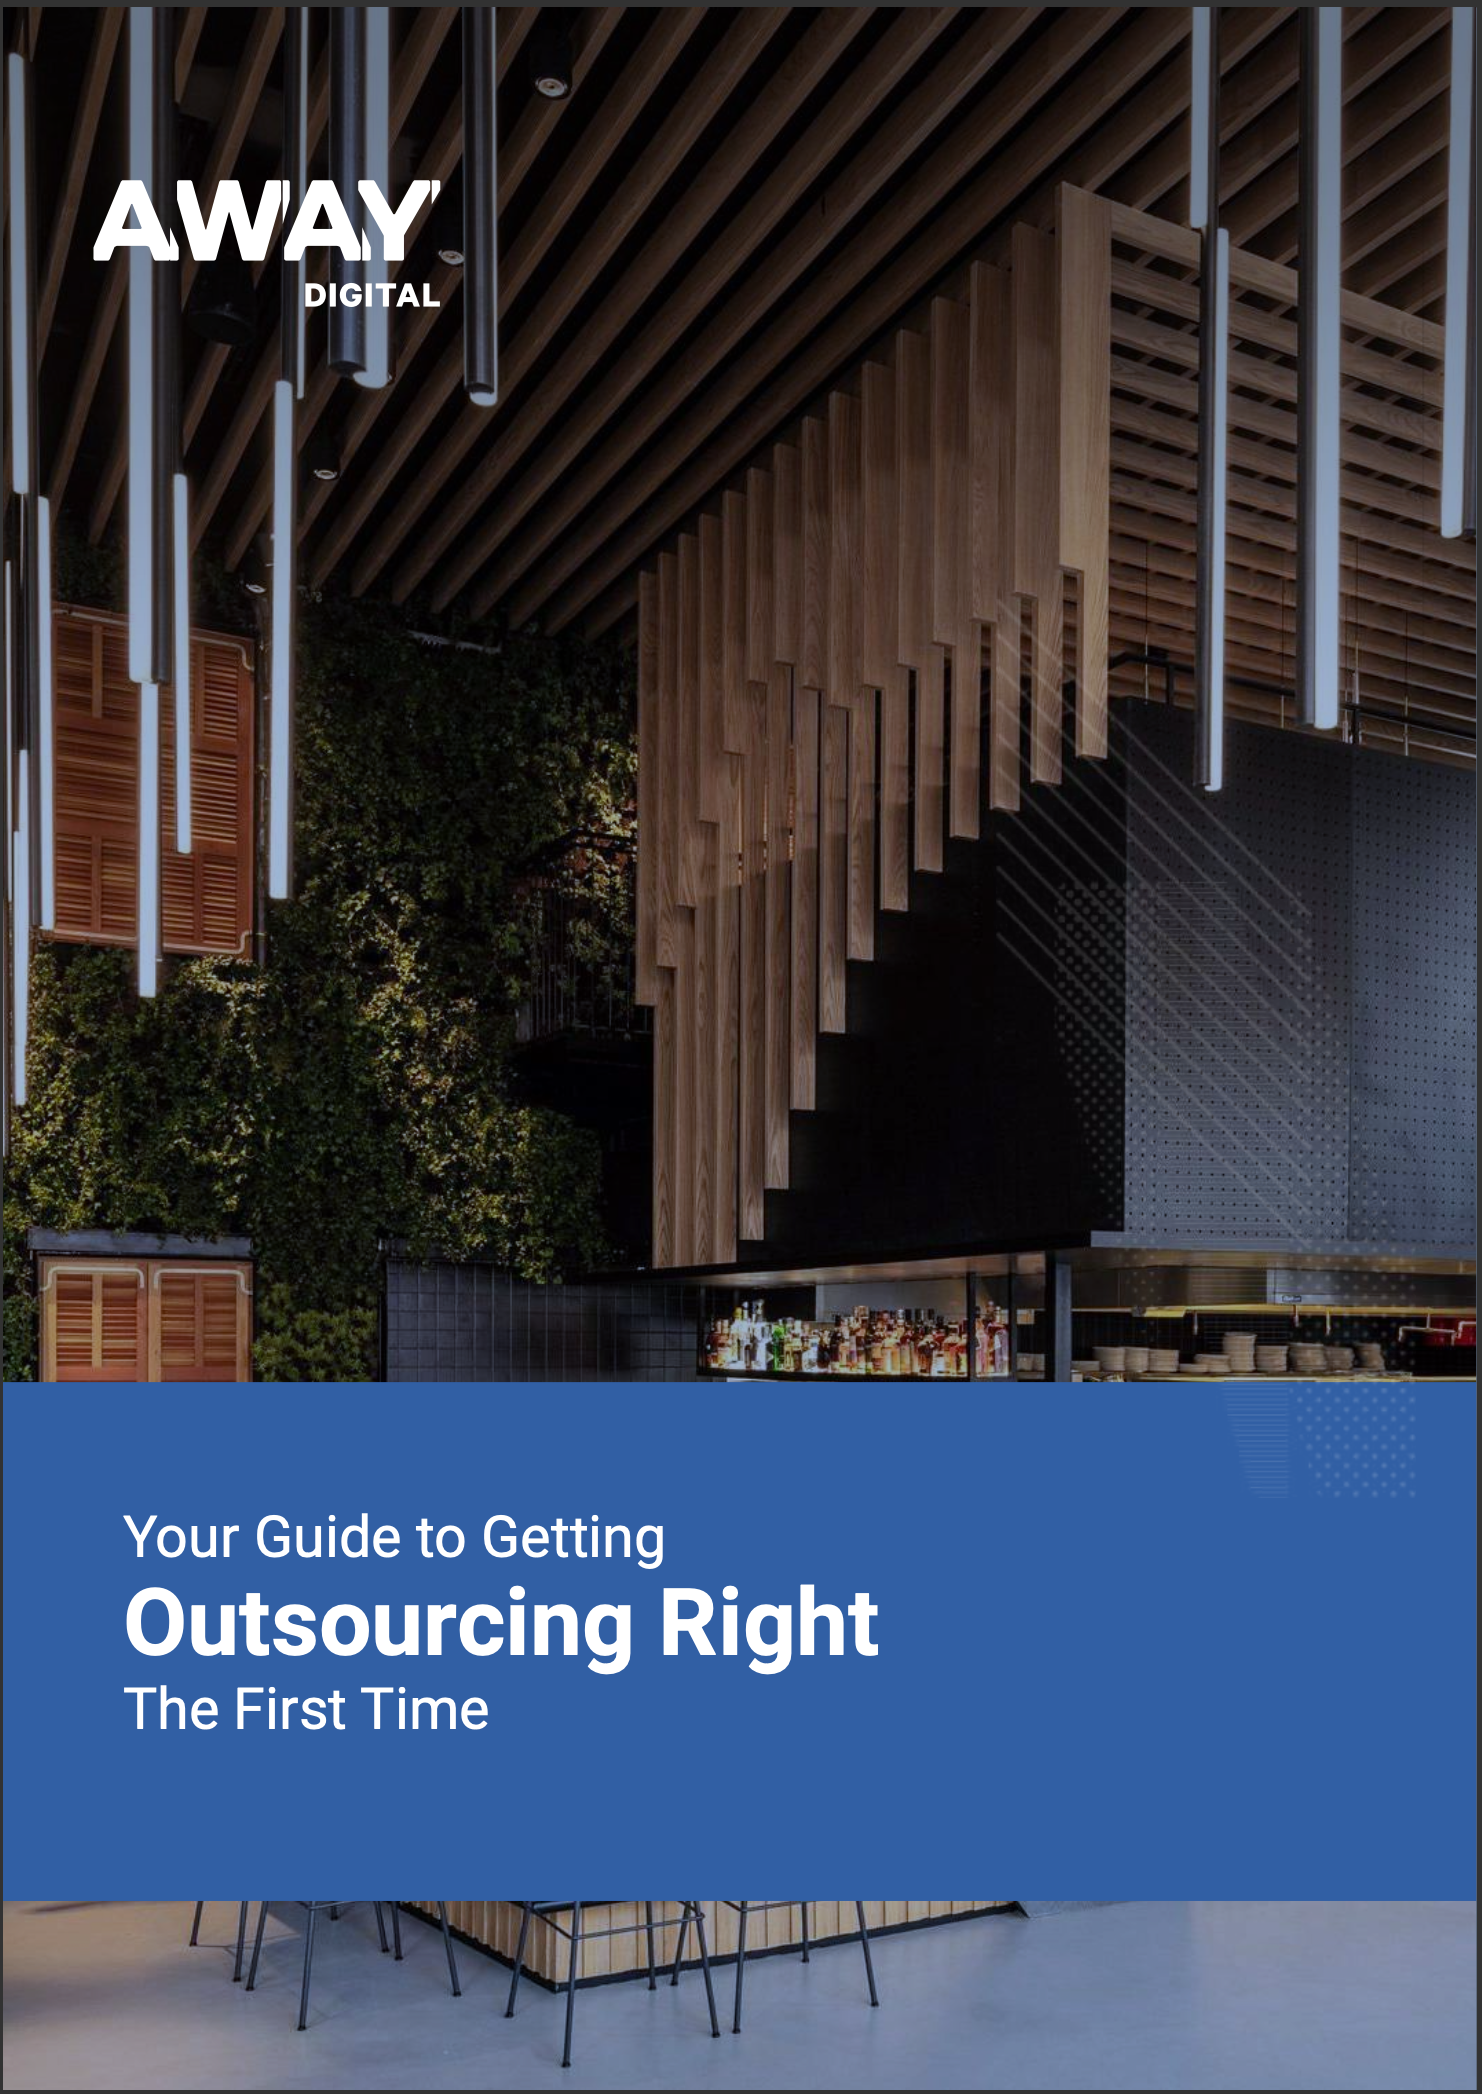 Your Guide to Getting Outsourcing Right the First Time.